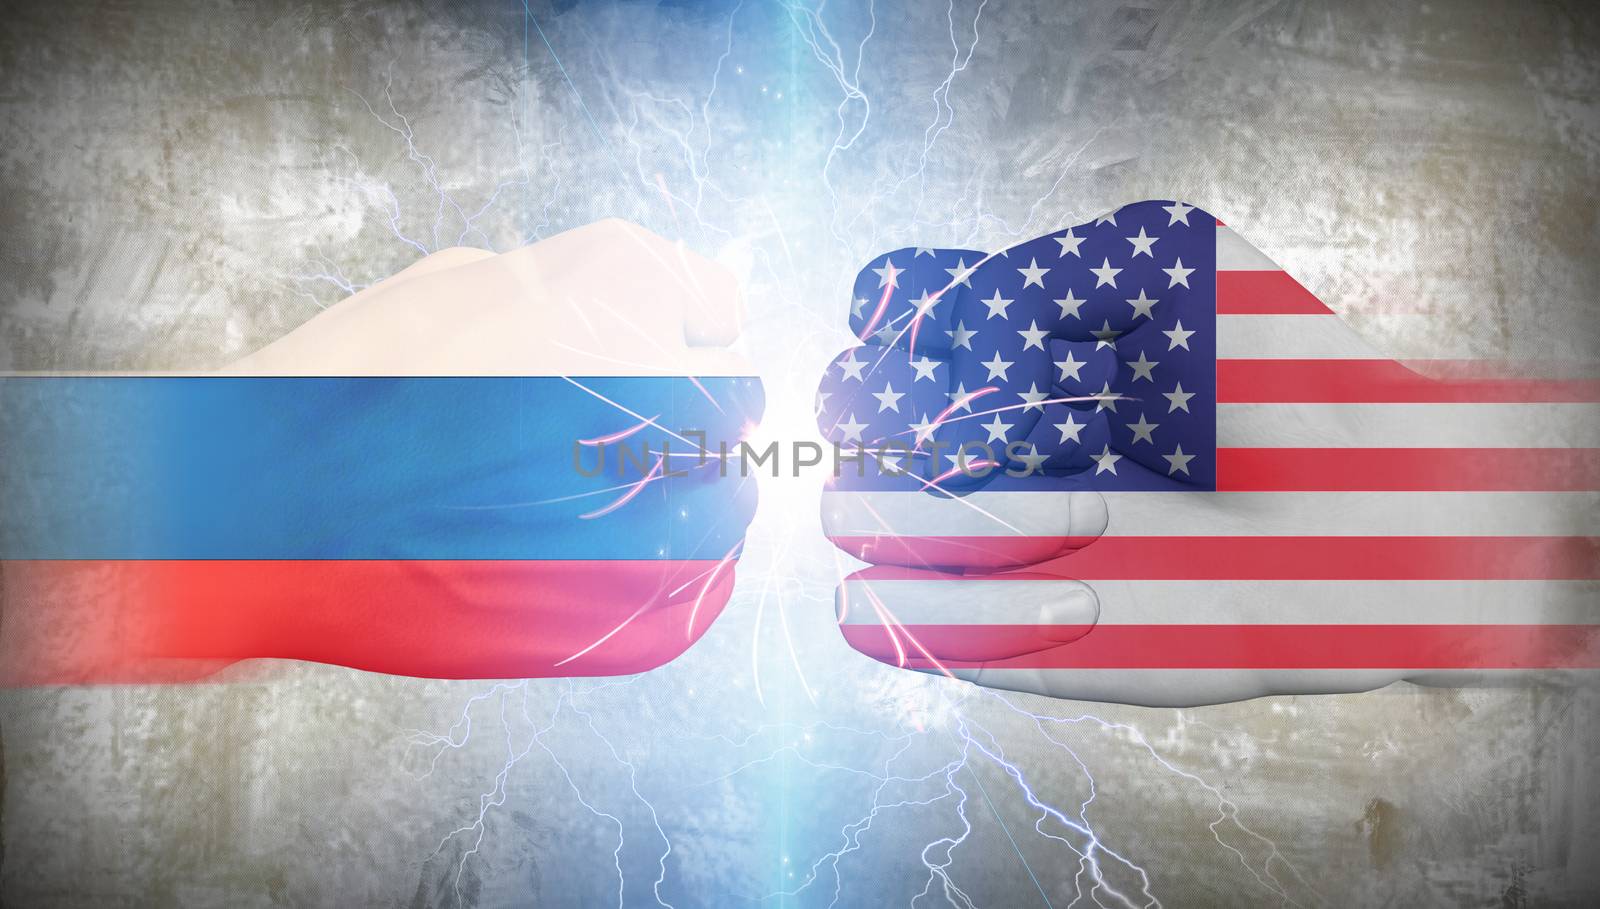 USA vs Russia by applesstock